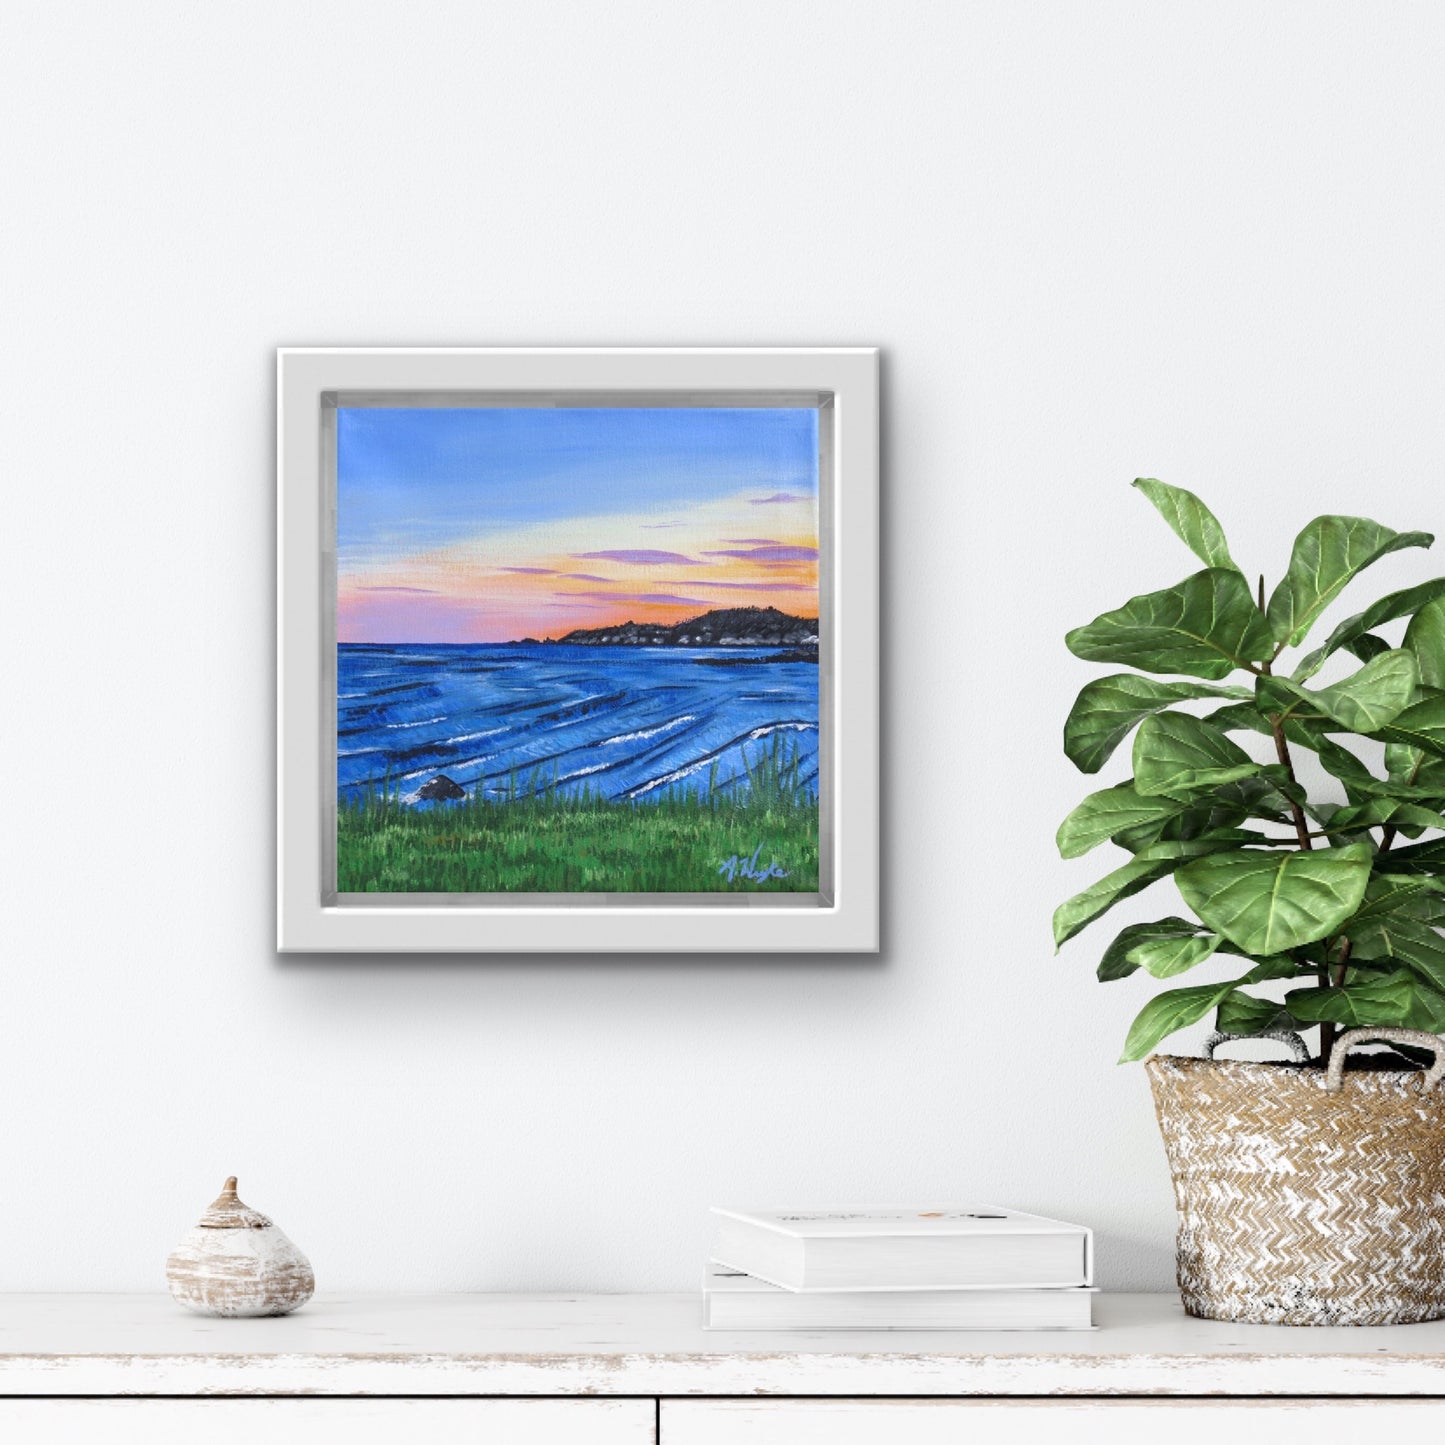 Travel Artwork By Boston Latinx Artist Alexandra Wuyke "Sunset at Rocky Neck" hangs over a fireplace in a living room.